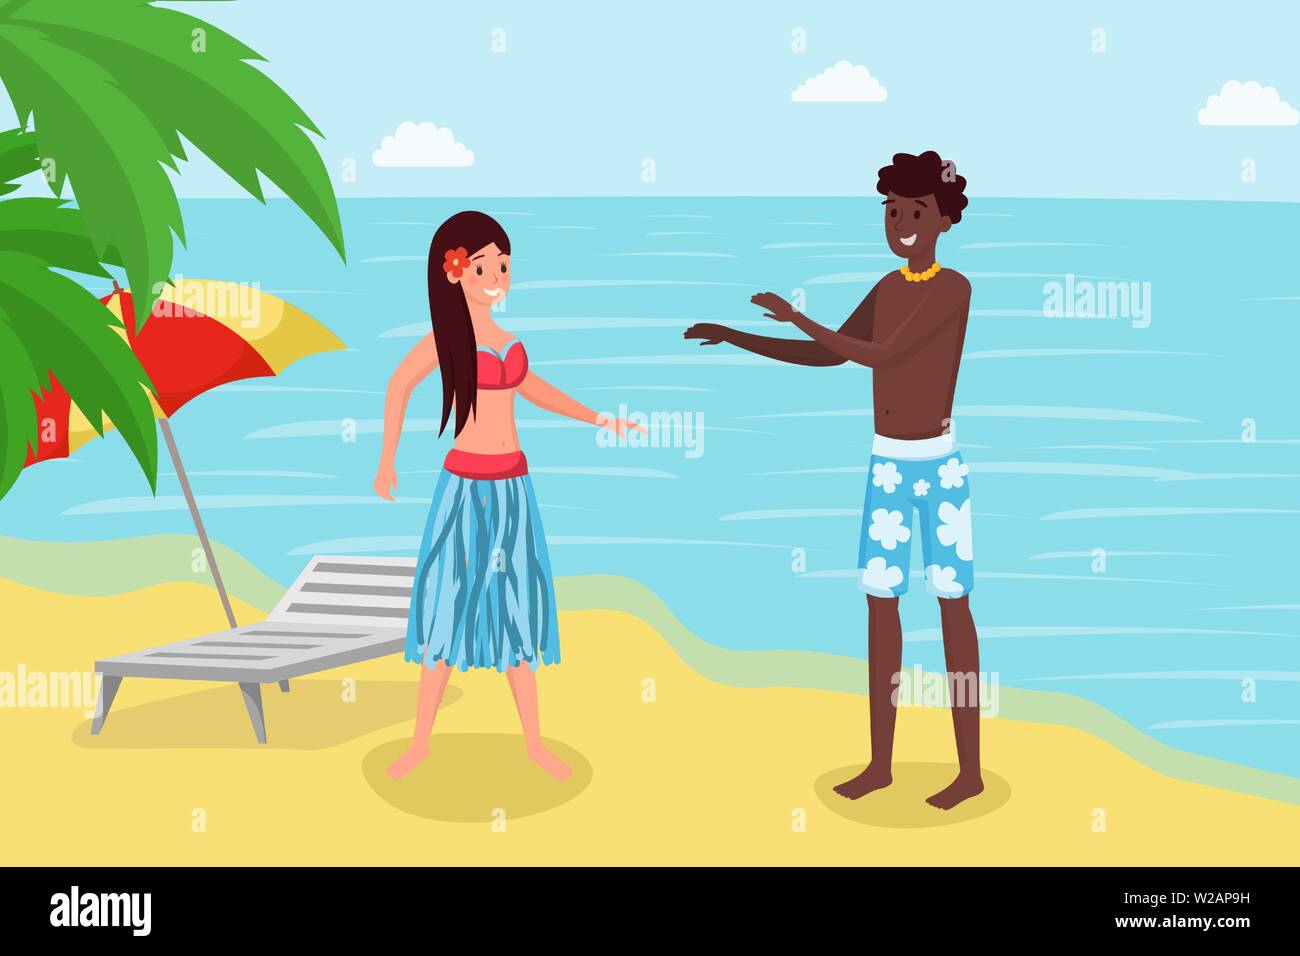 Summertime vacation on luxury tropical island. Cute couple, girlfriend and boyfriend dancing on seashore cartoon character illustration. Experiencing foreign culture, traditions flat vector concept Stock Vector